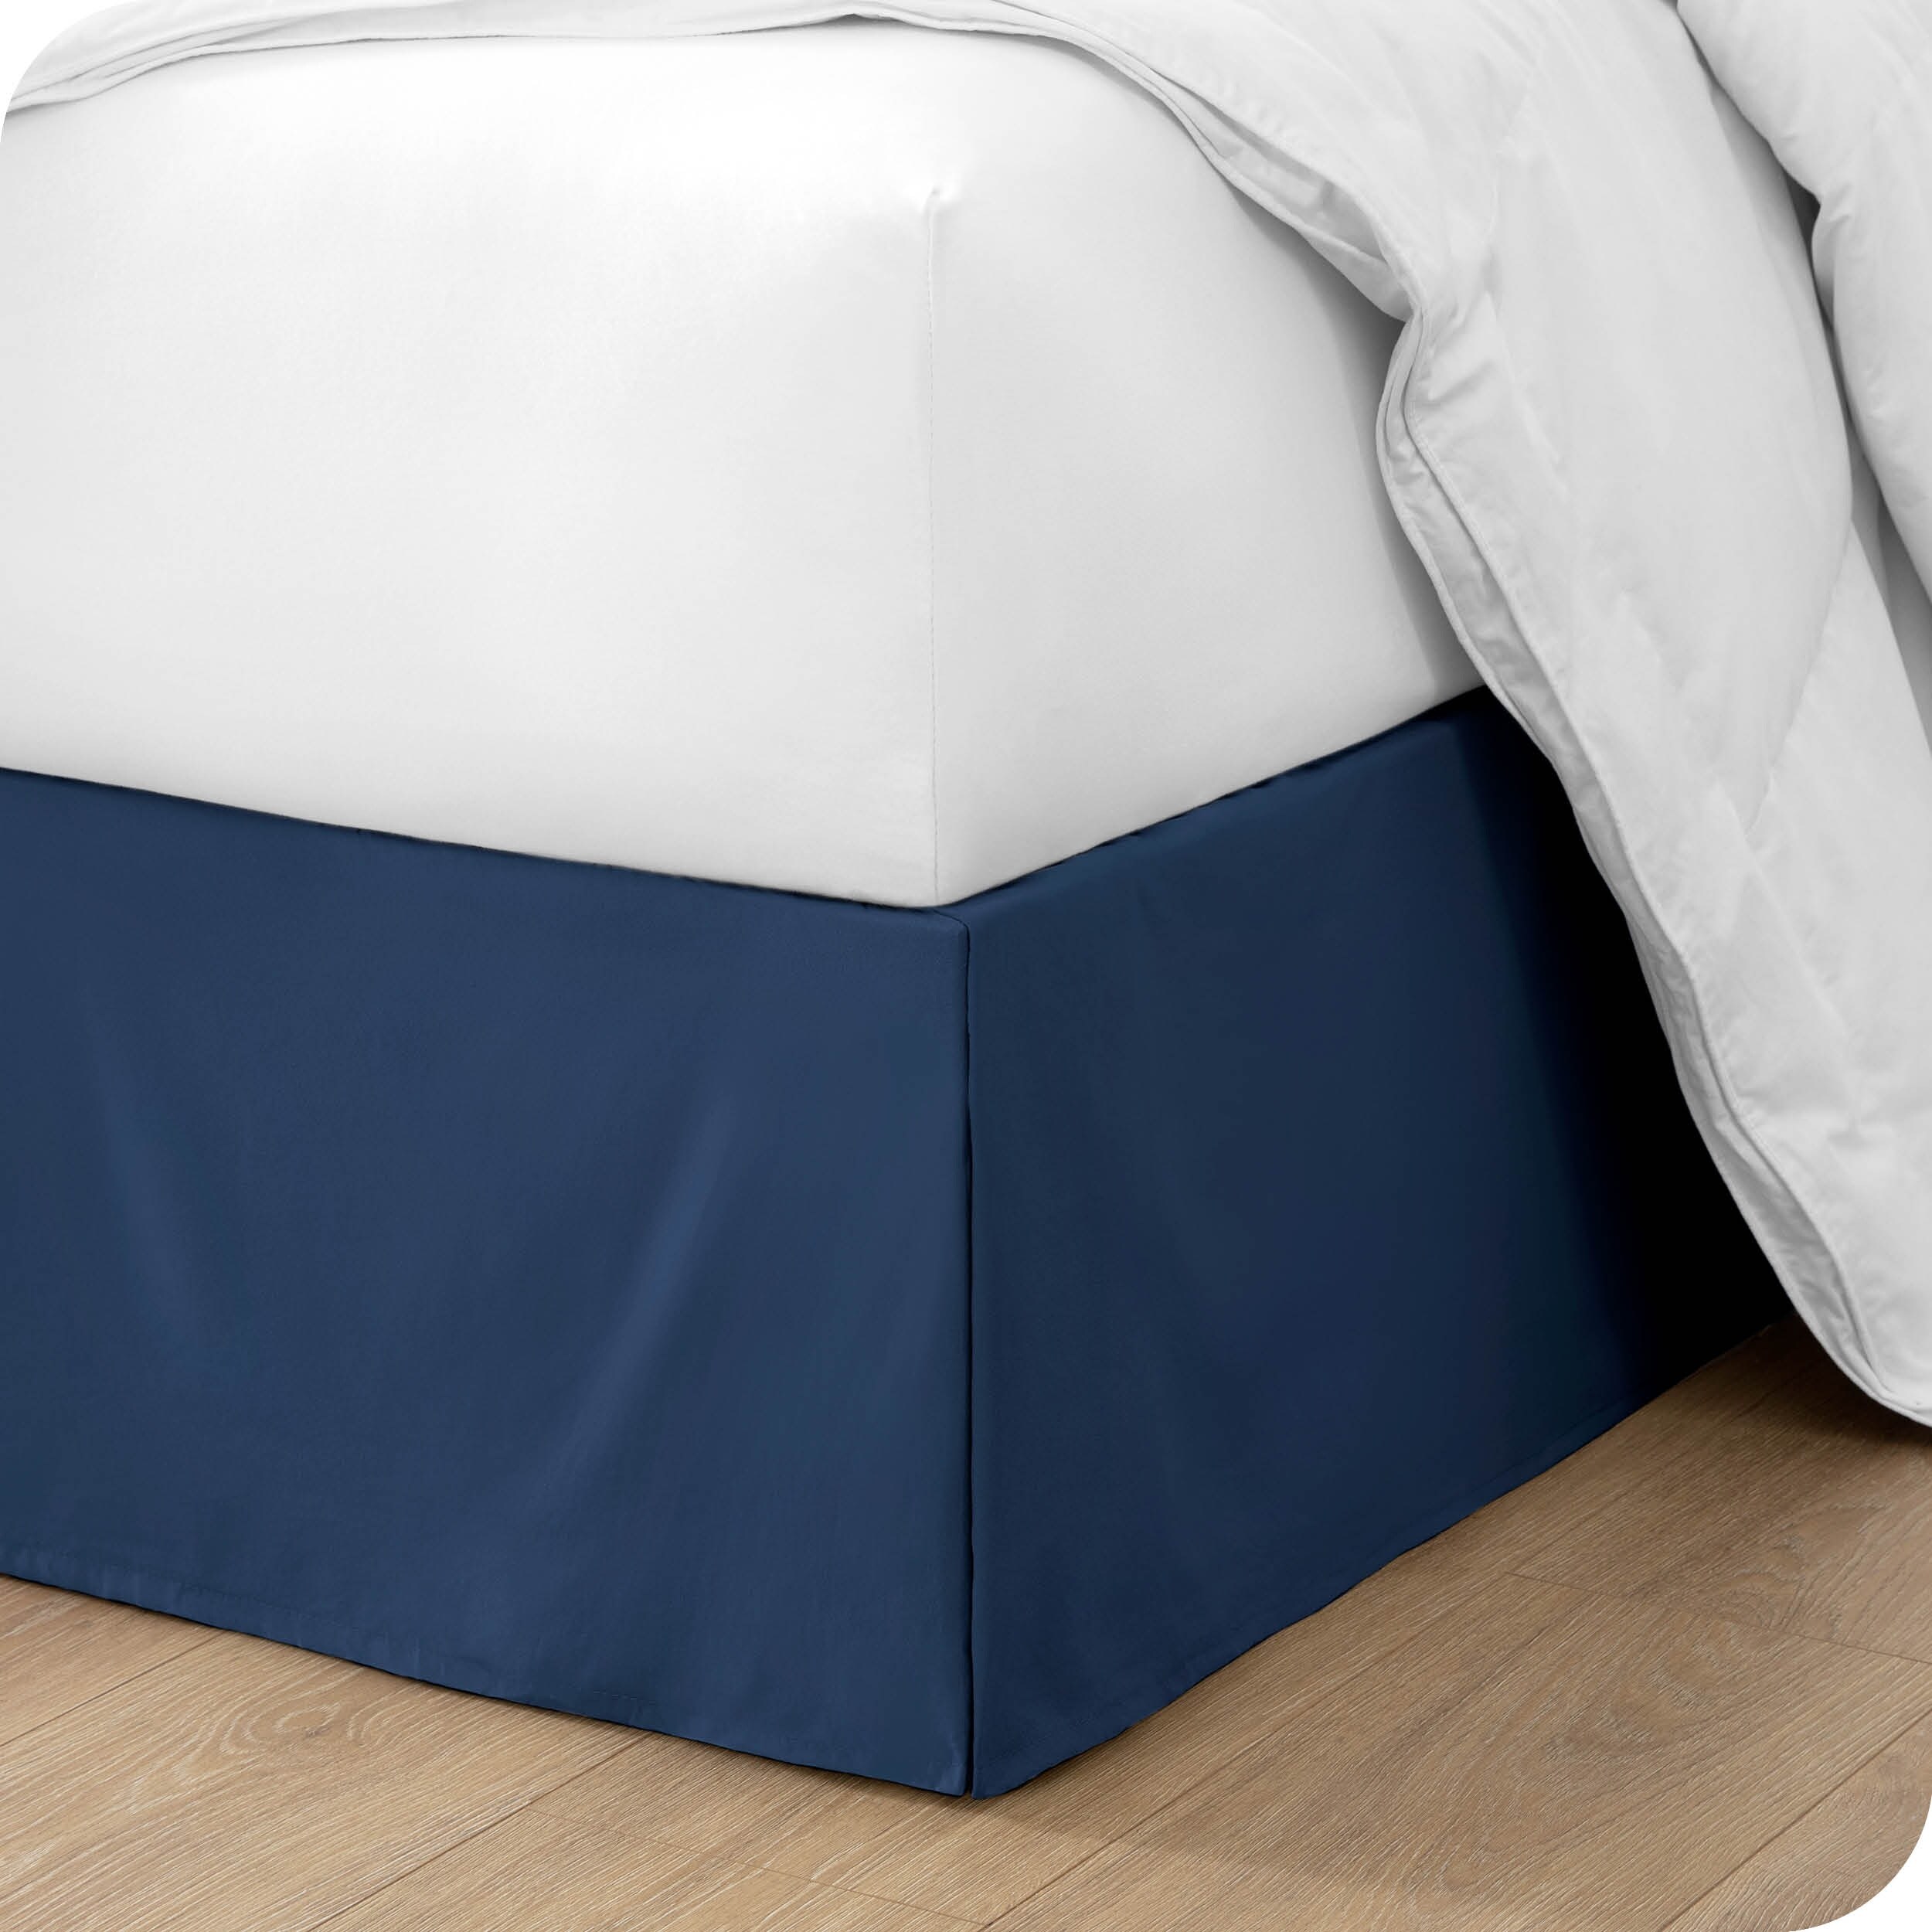 Dust Ruffle Bed Skirt with Split Corners for Day beds Microfiber Navy Blue Solid 